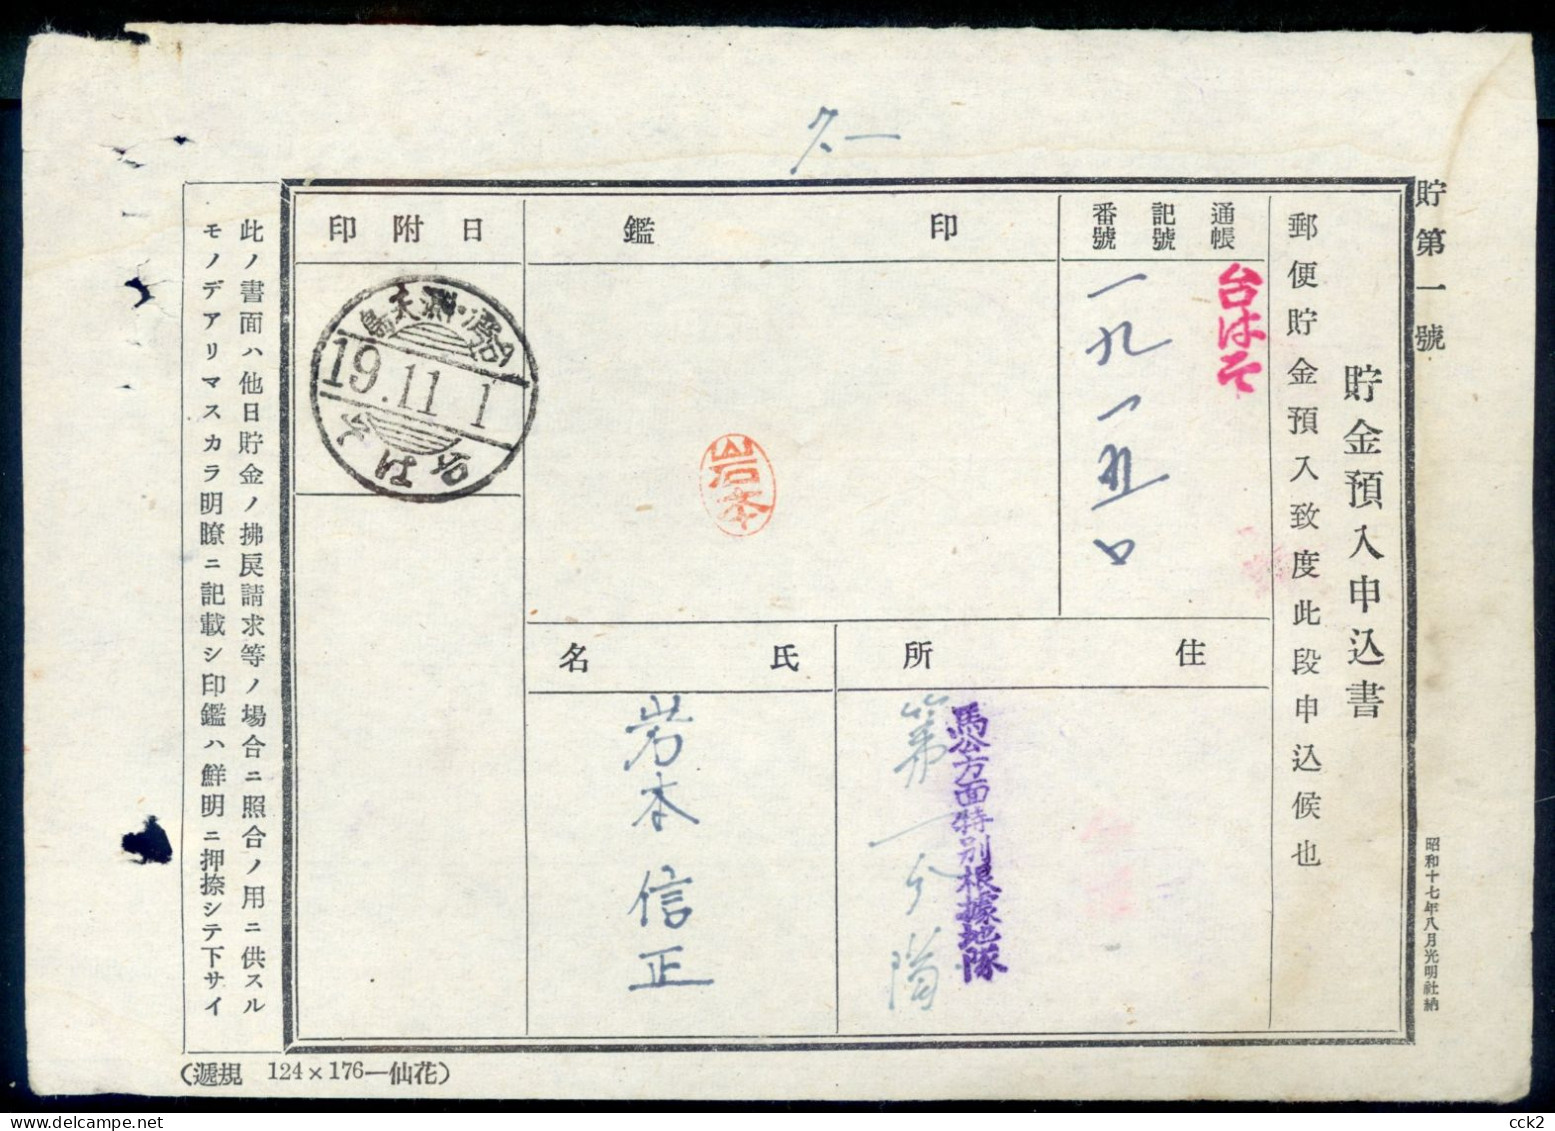 JAPAN OCCUPATION TAIWAN- Reserve Fund Early Entry Application Form(Taiwan Cetian Island) 19.11.1 - 1945 Occupation Japonaise